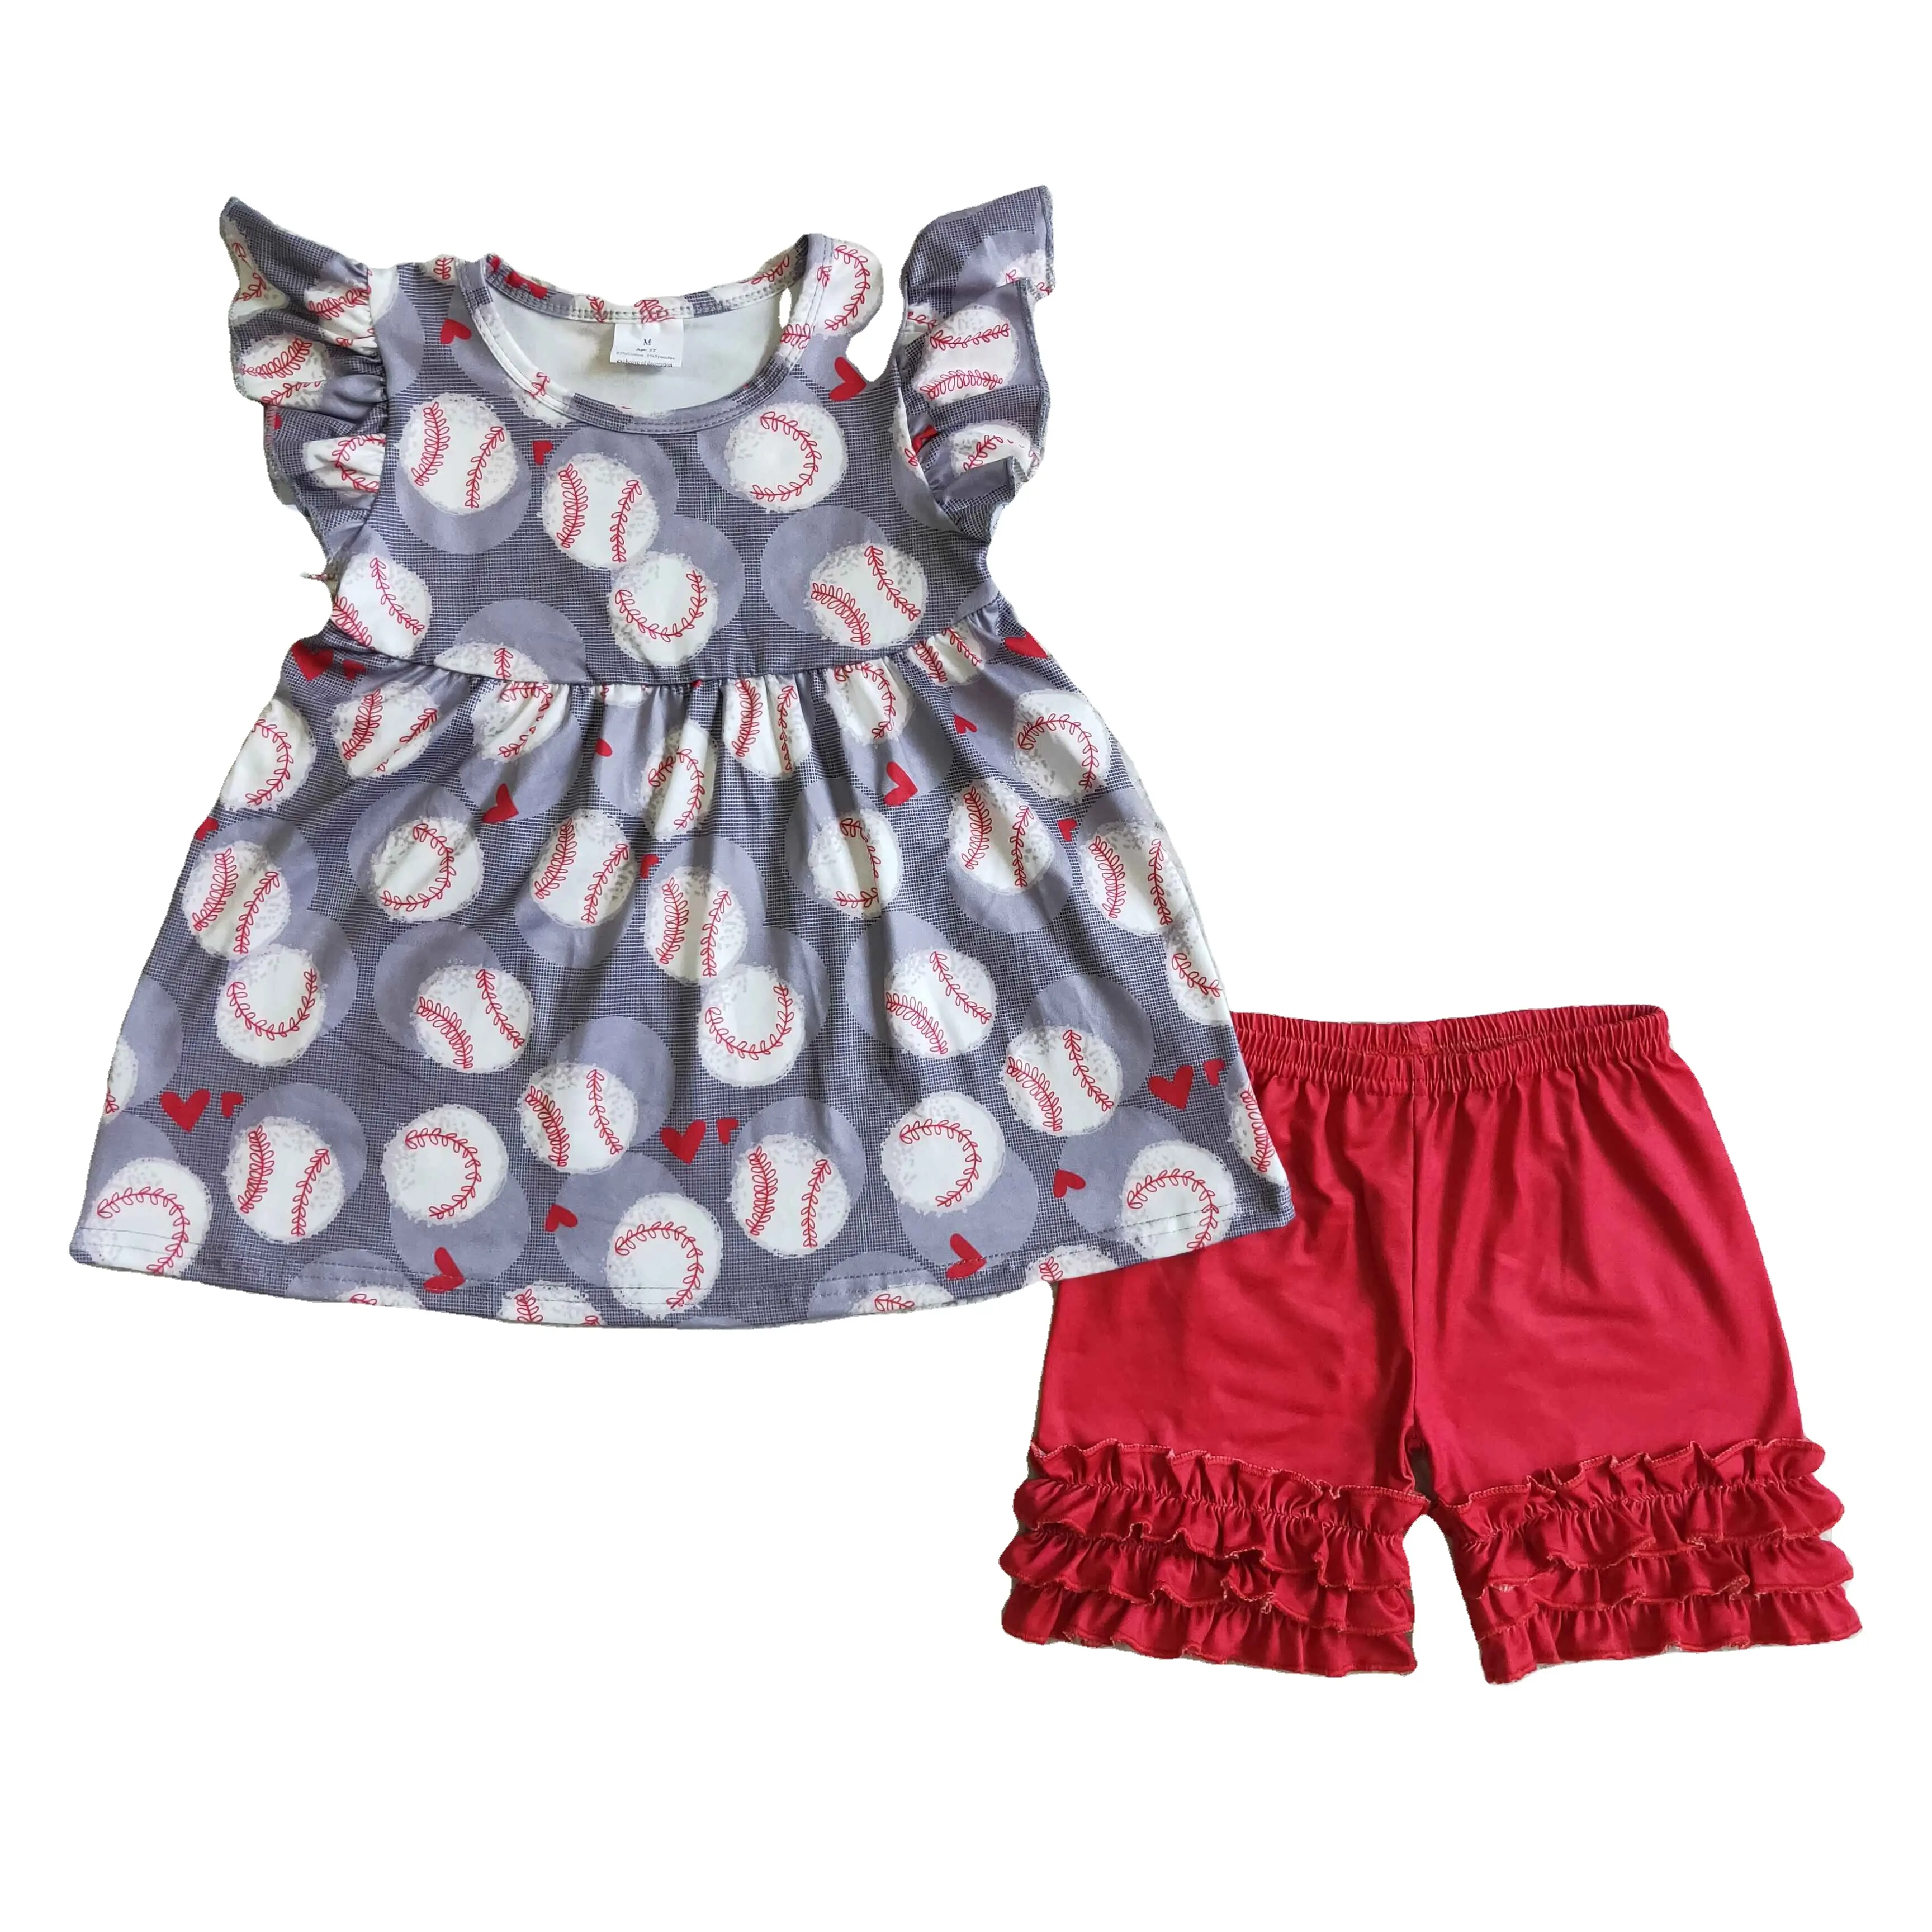 A10-5-1 New Kids Girls Clothing Sets Summer Baseball Print Small Flying Sleeve Red Lace Shorts Suit